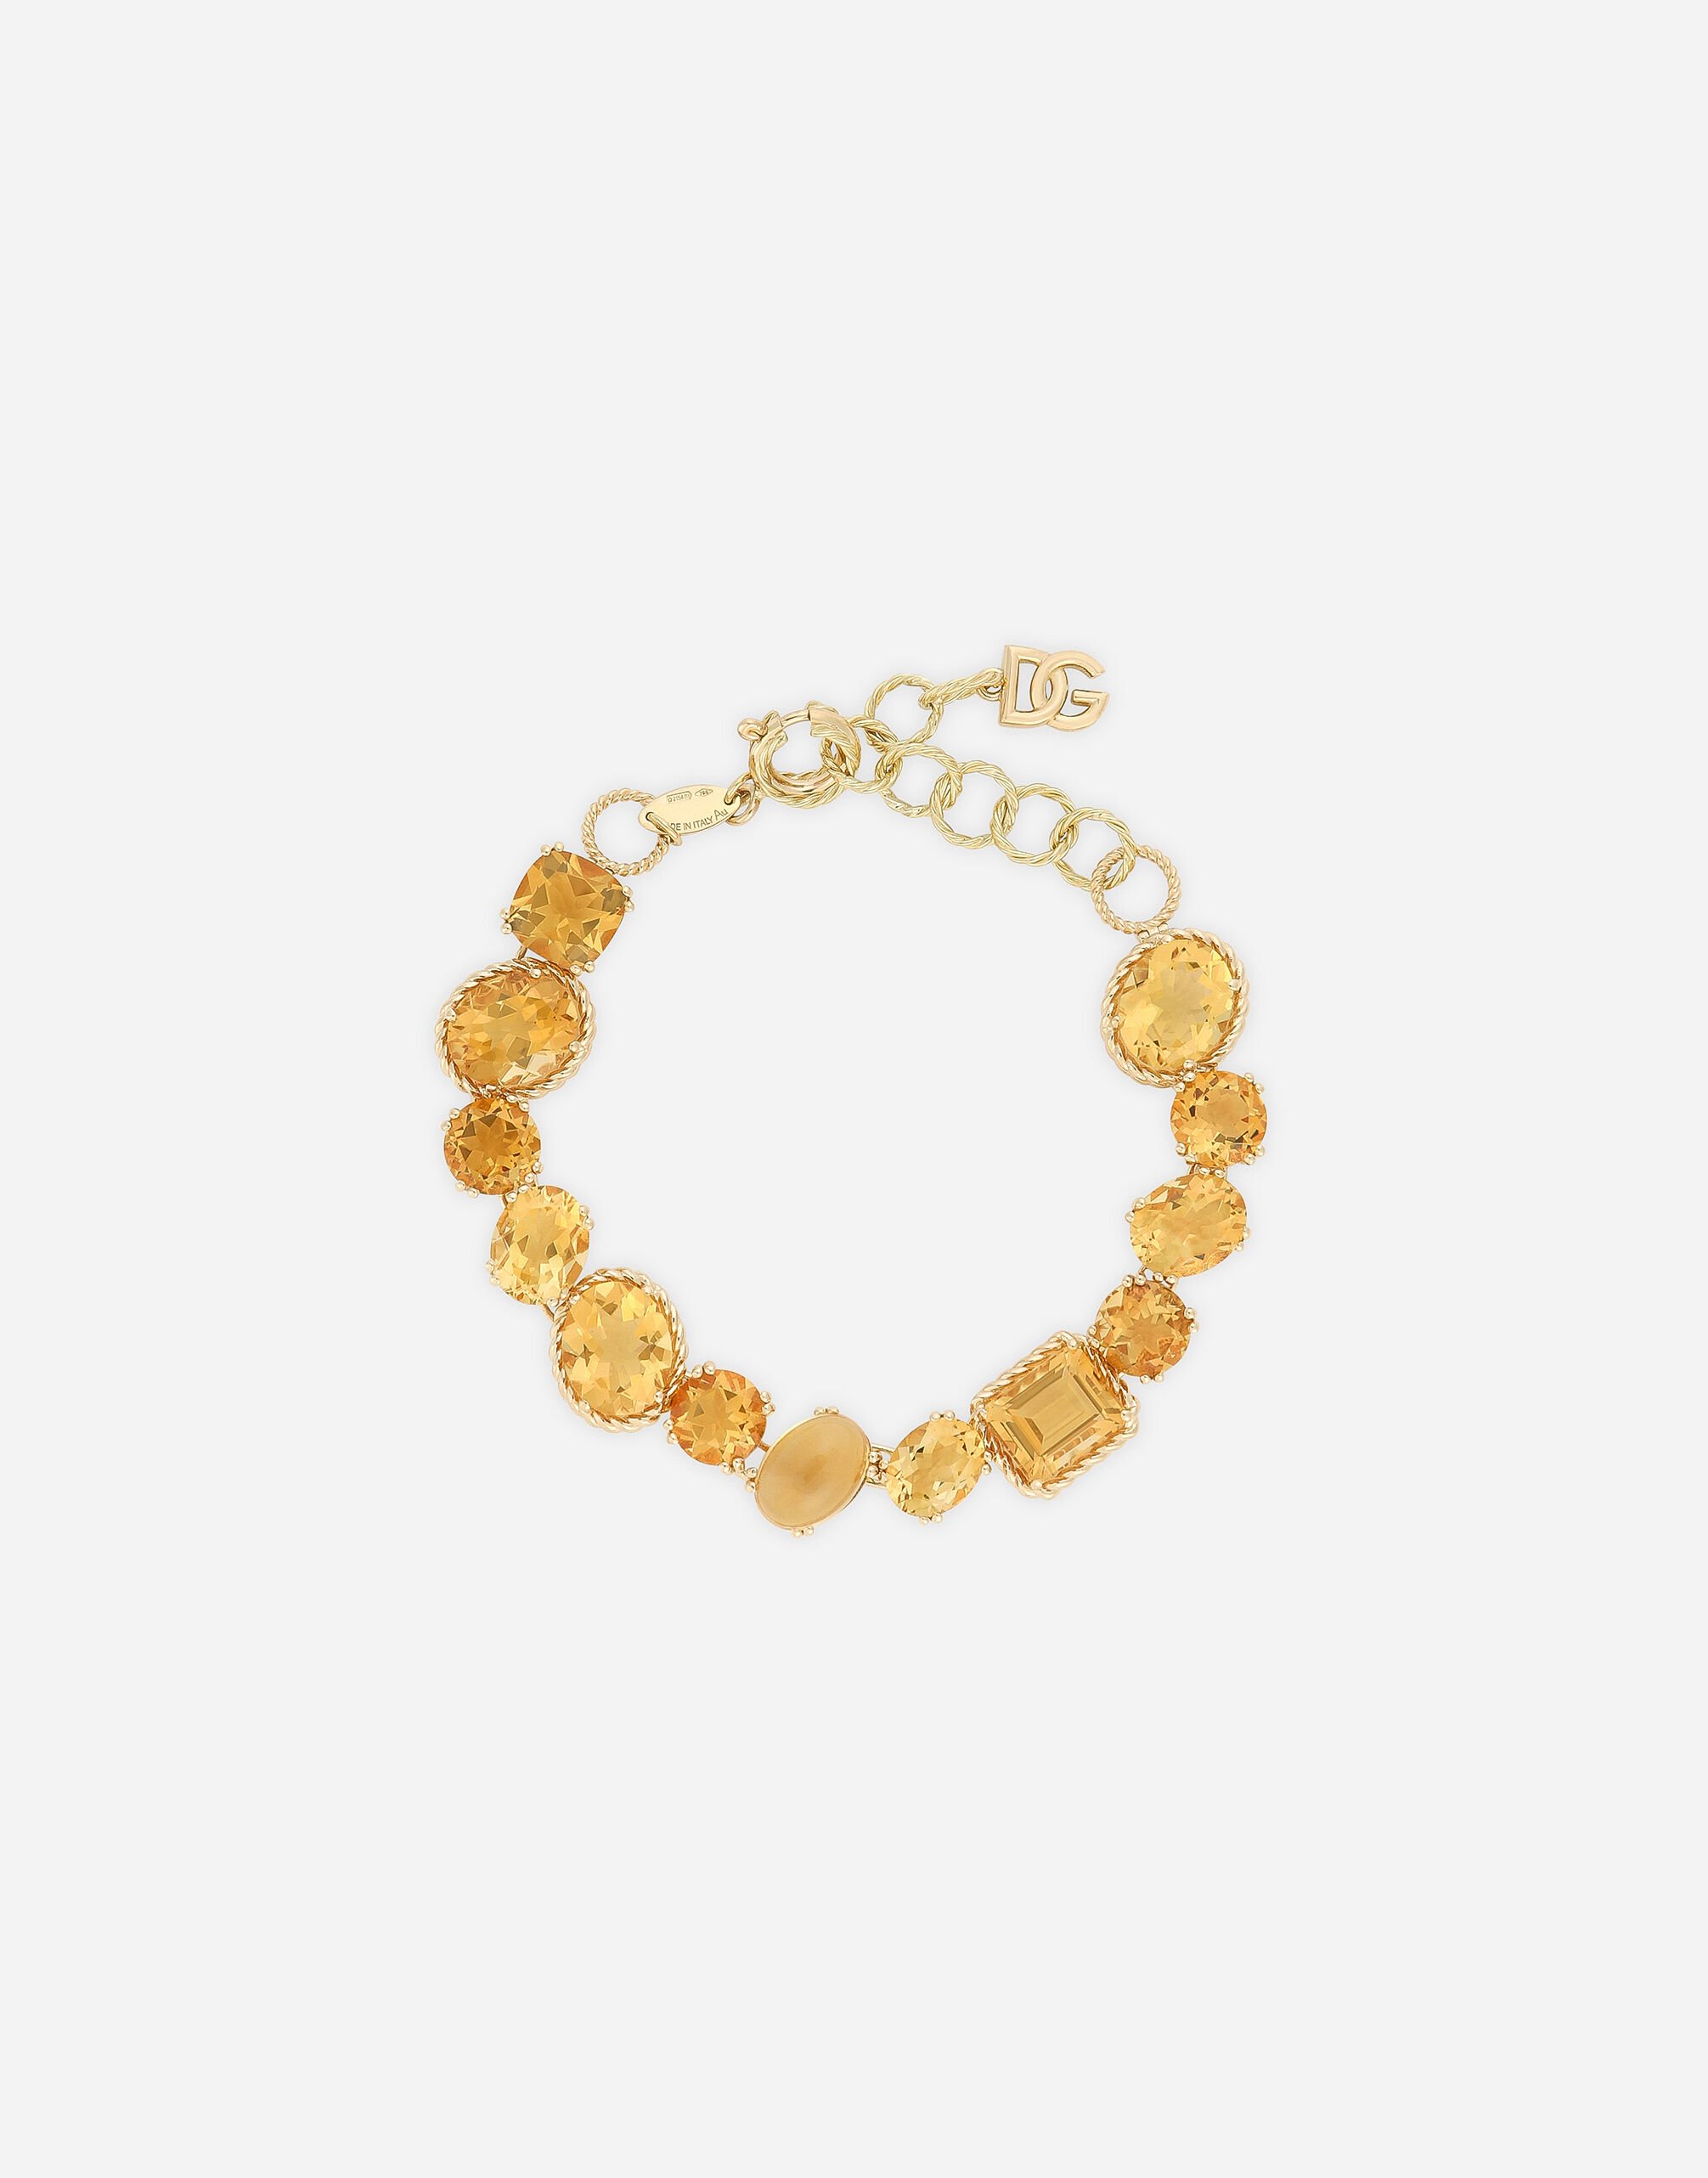 Dolce & Gabbana Anna bracelet in yellow gold 18kt with citrines Gold WBQA1GWQC01